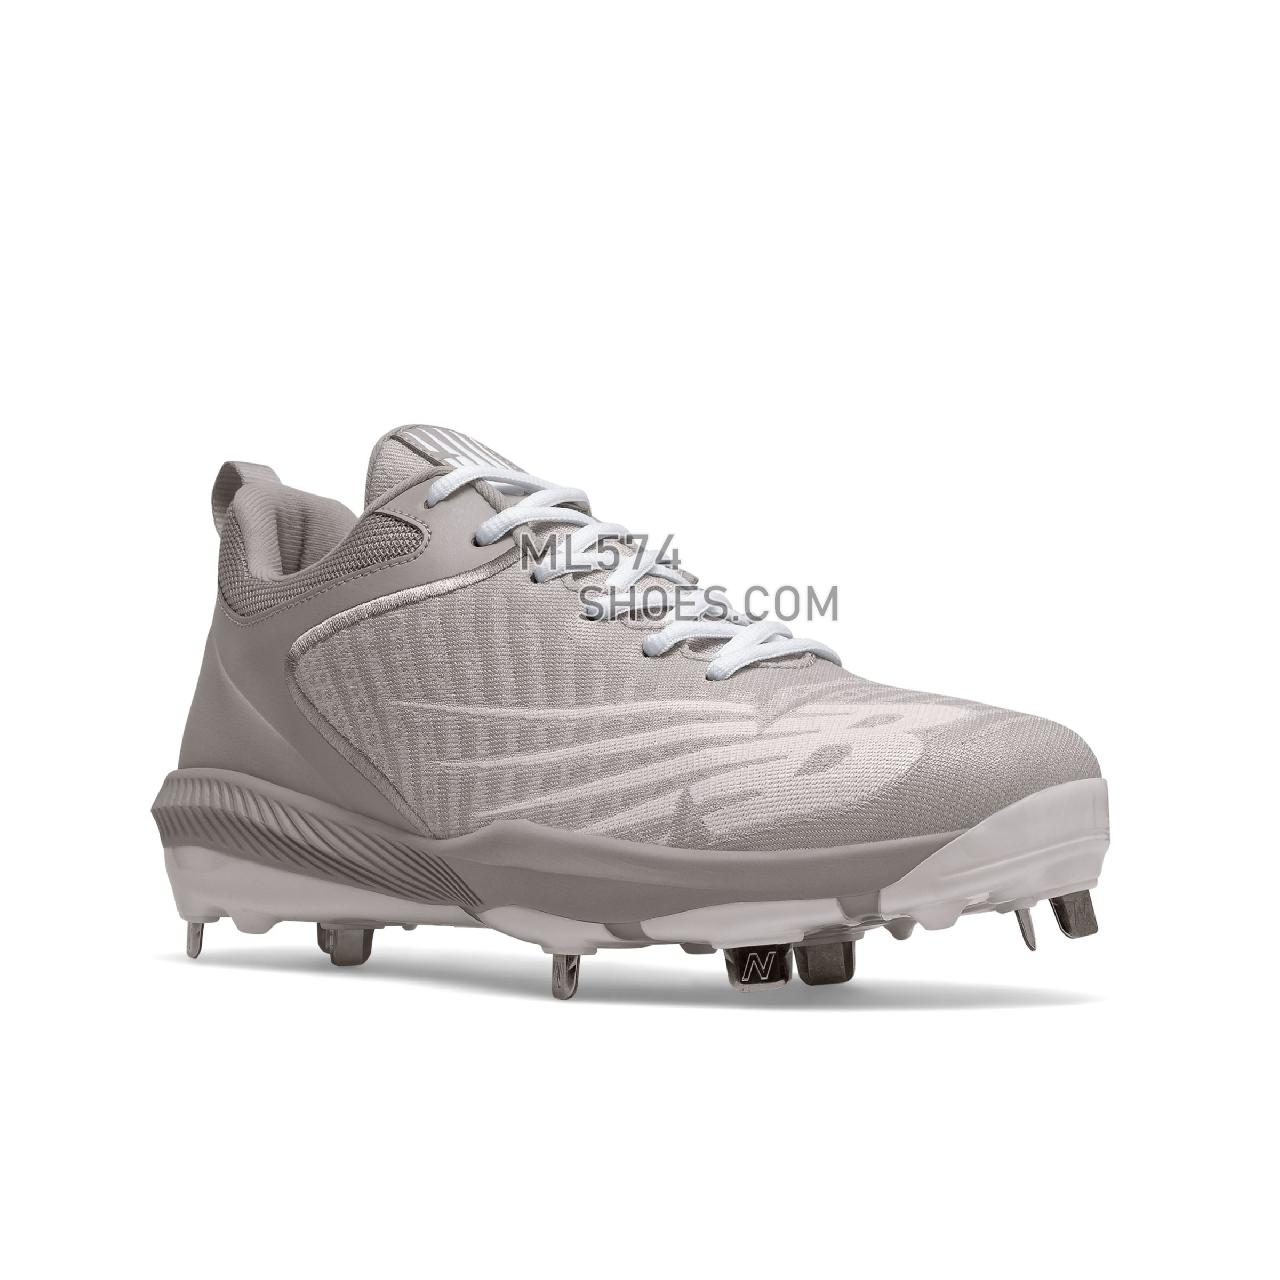 New Balance FuelCell 4040 v6 Metal - Men's Mid-Cut Baseball Cleats - Grey with White - L4040TG6